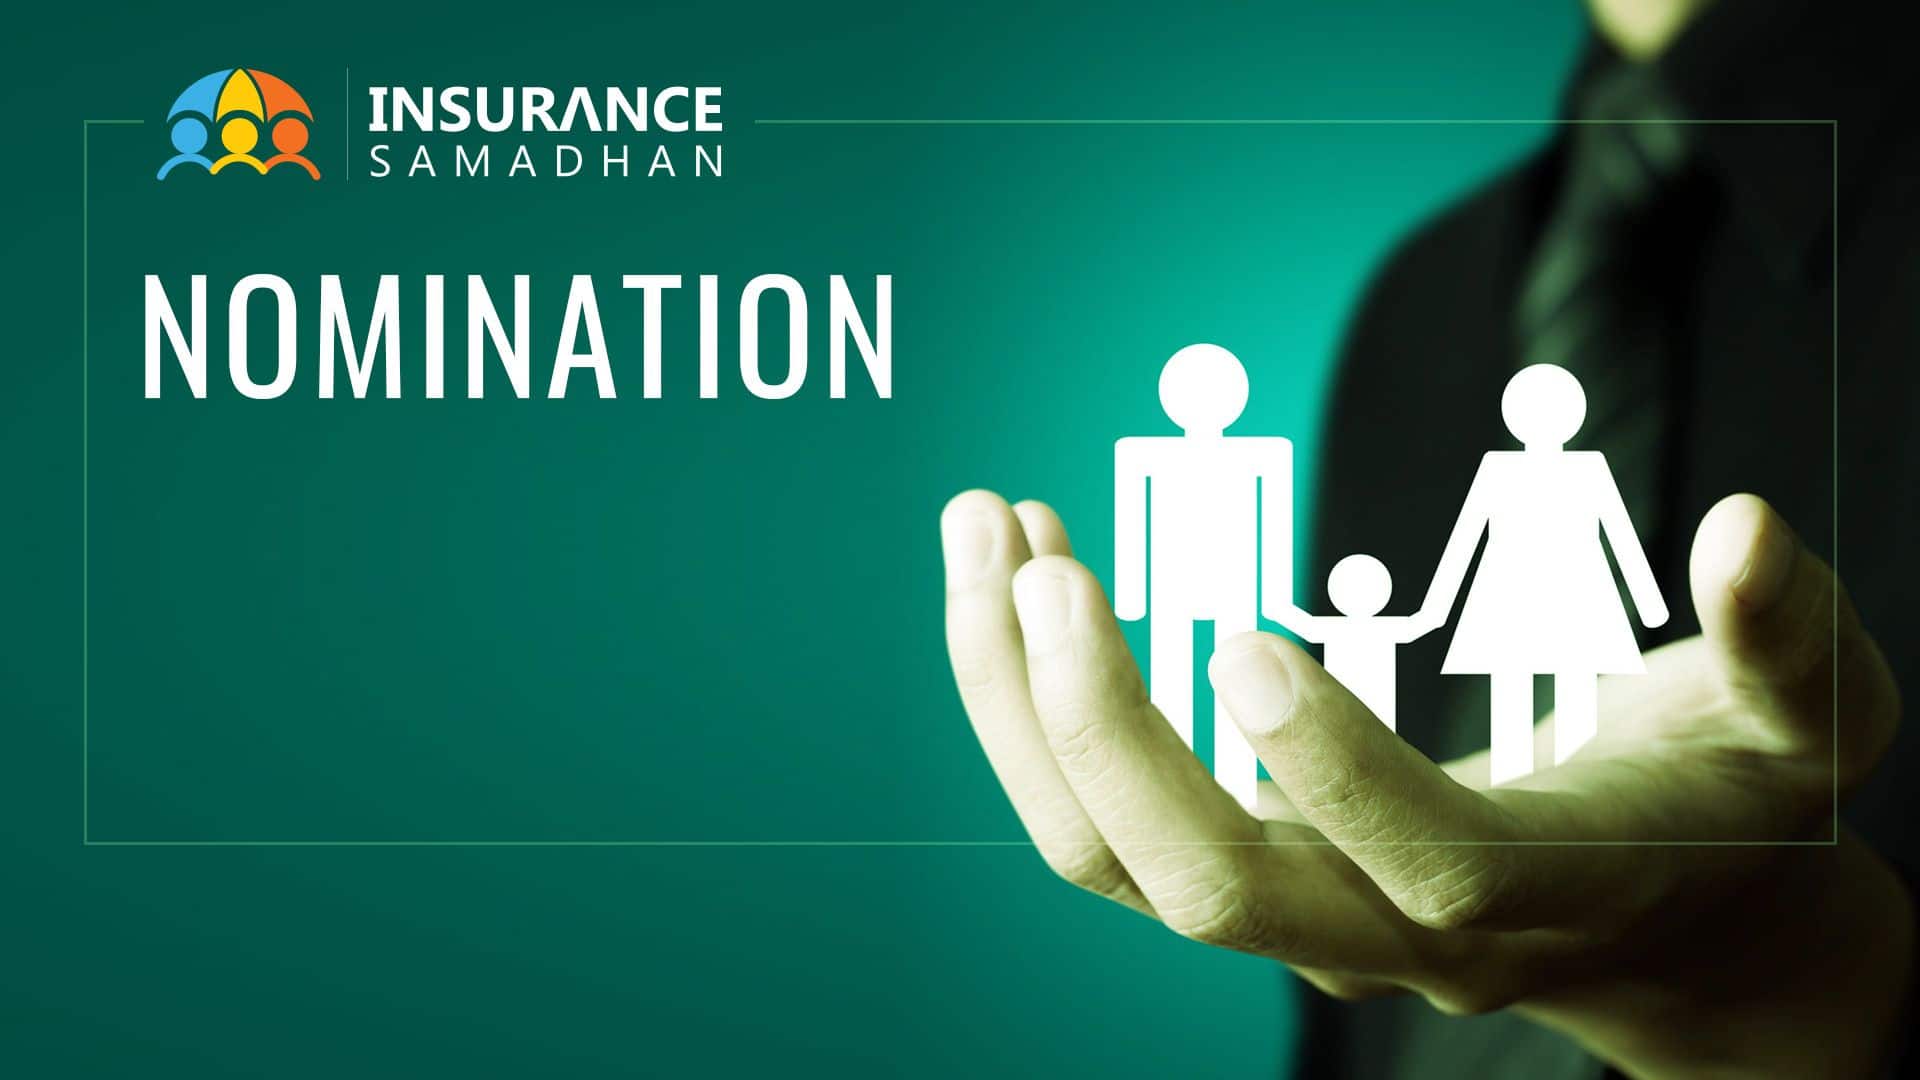 nomination & assignment in life insurance